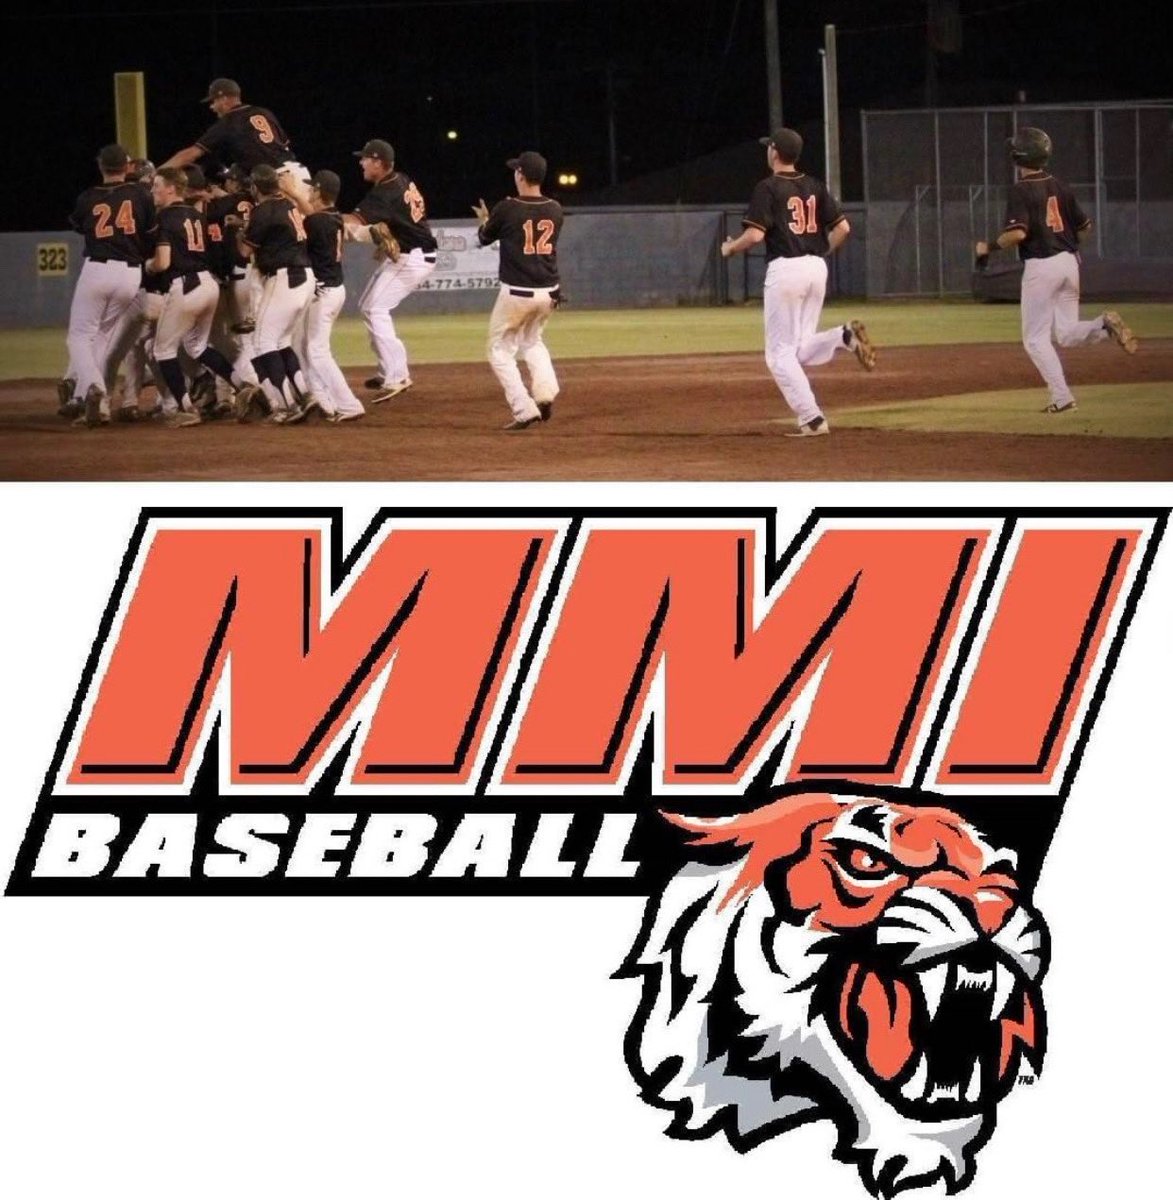 Blessed to receive my first offer from Marion Military Institute! @Baseball_Pats @CoachGarner3 @guy_3g @jamiemitchell85 @MarionMilitary @BaseballCountry